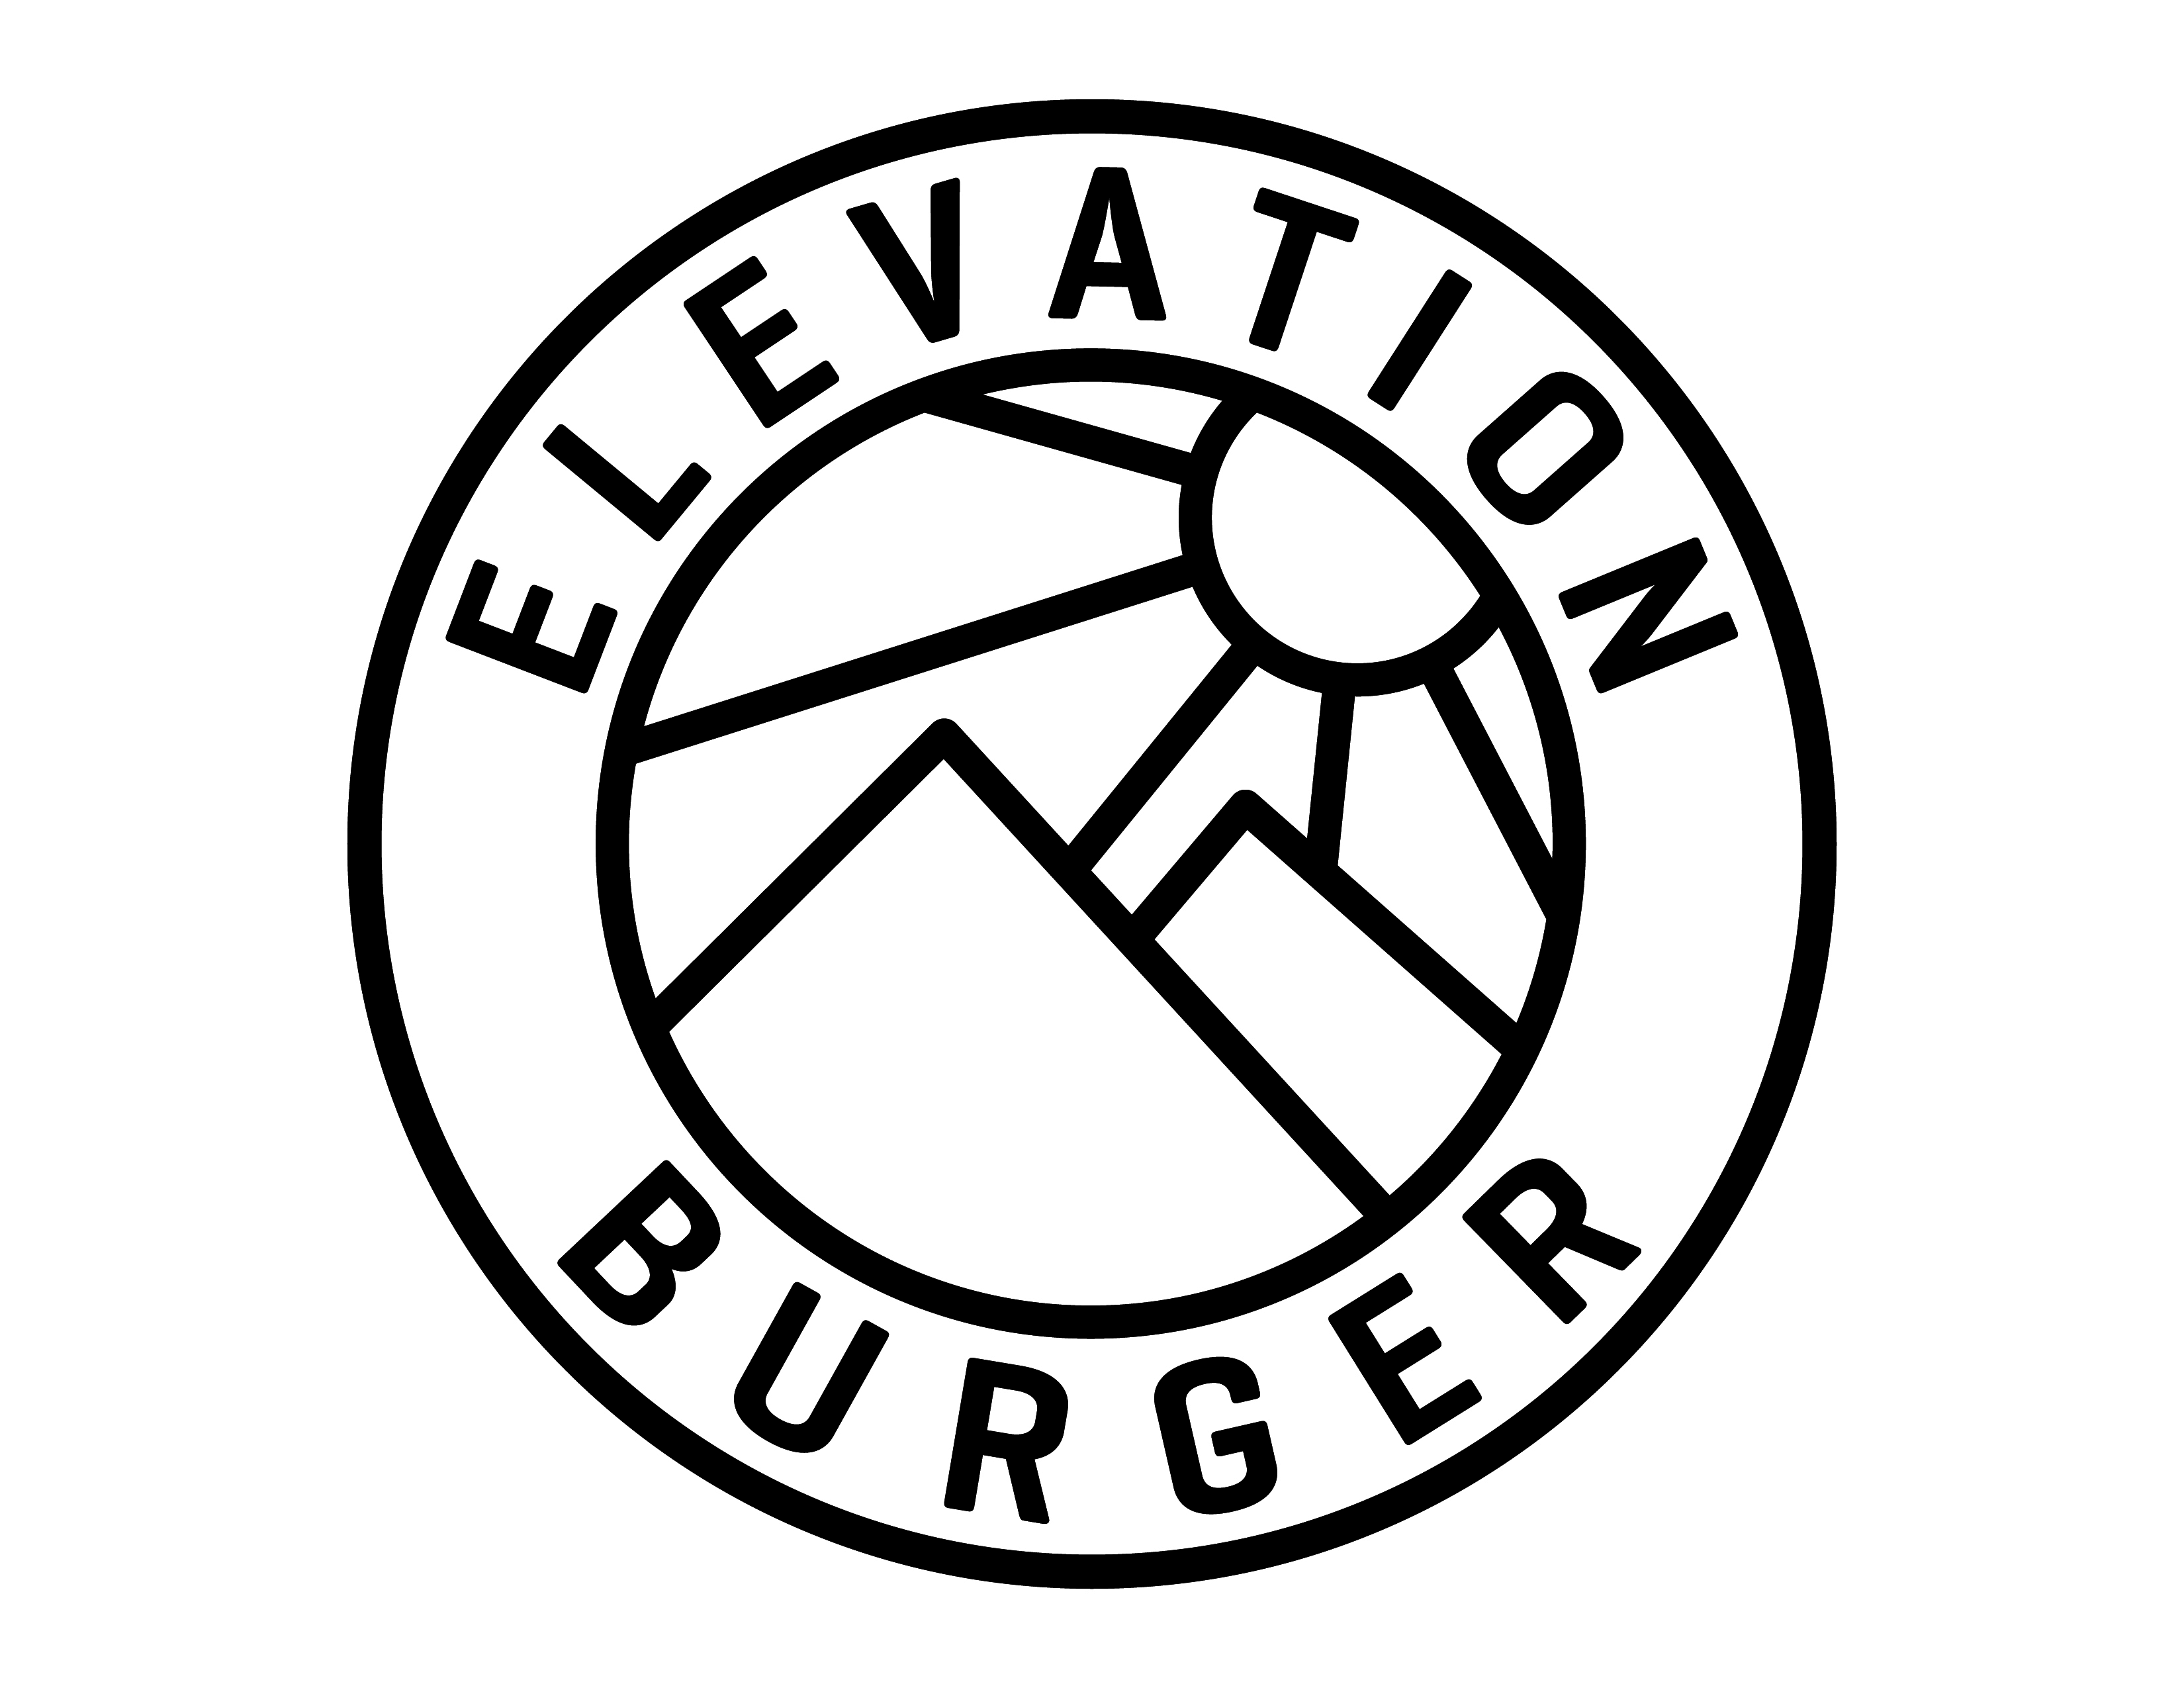 Elevation Burger Is the Best Fast-Food Restaurant in Collegeville, PA.